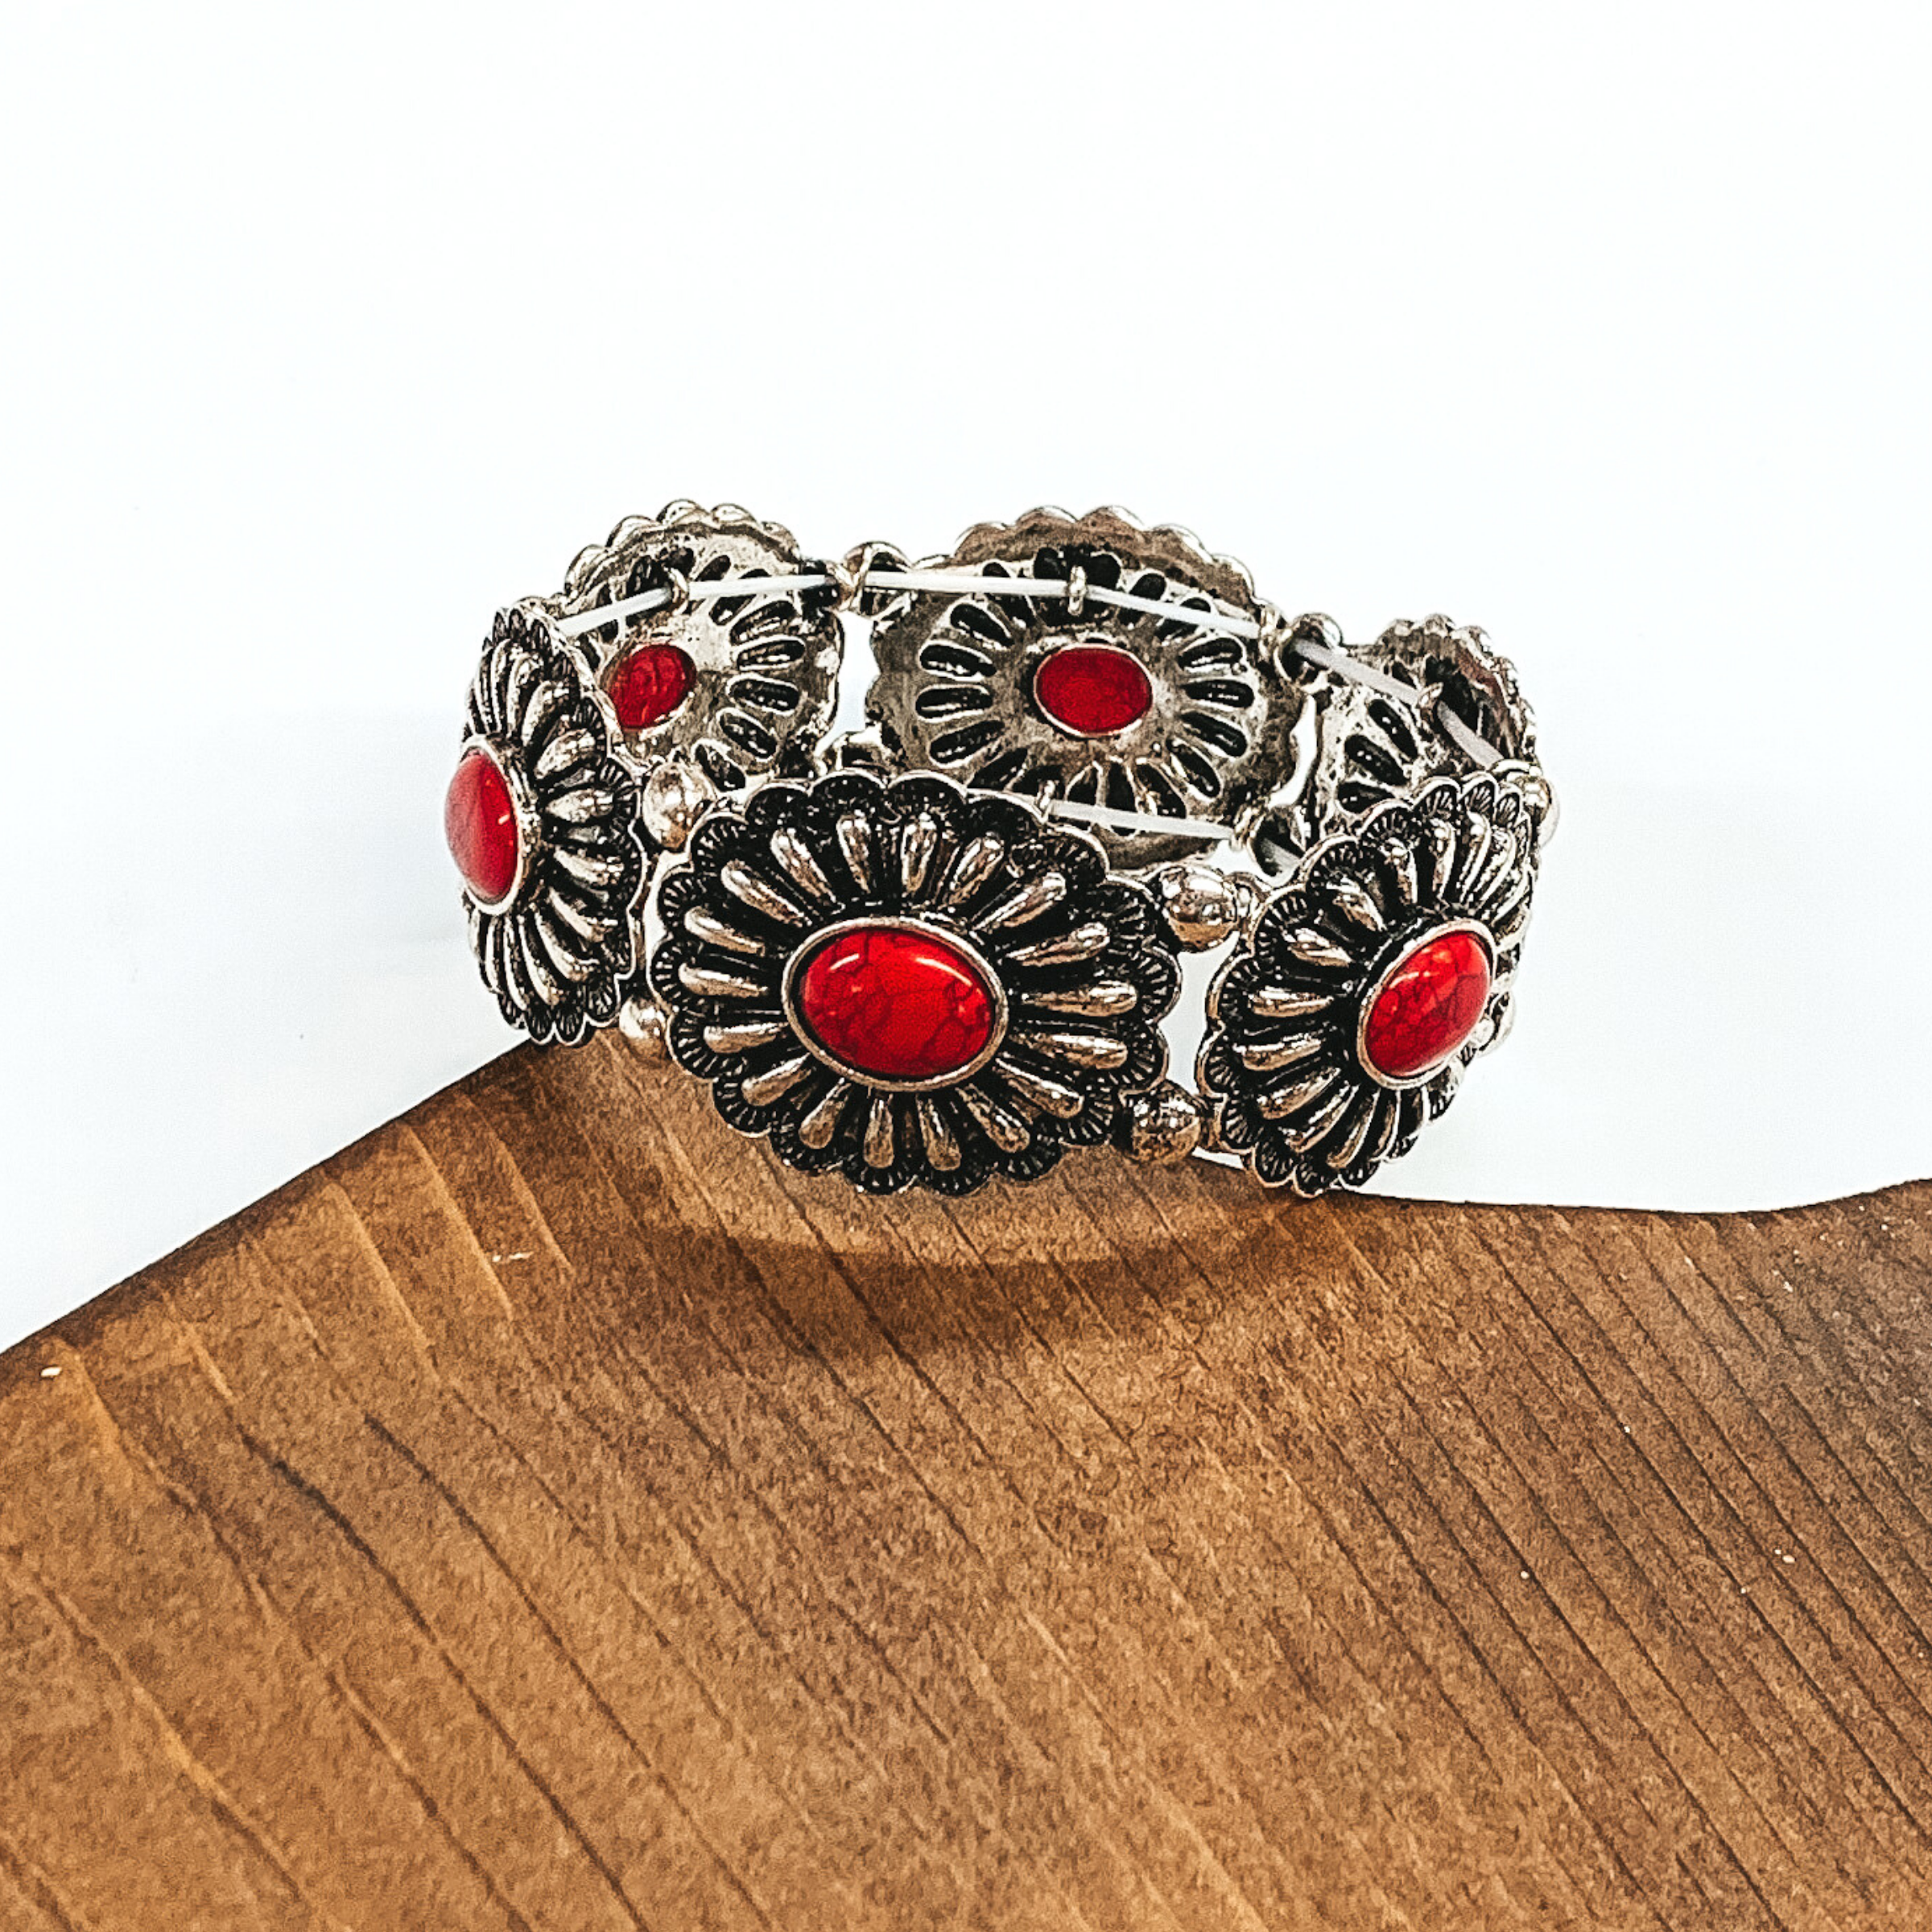 Silver, oval concho stretchy bracelet with oval center stones in red. This bracelet is pictured partially laying on a piece of wood and on a white background.